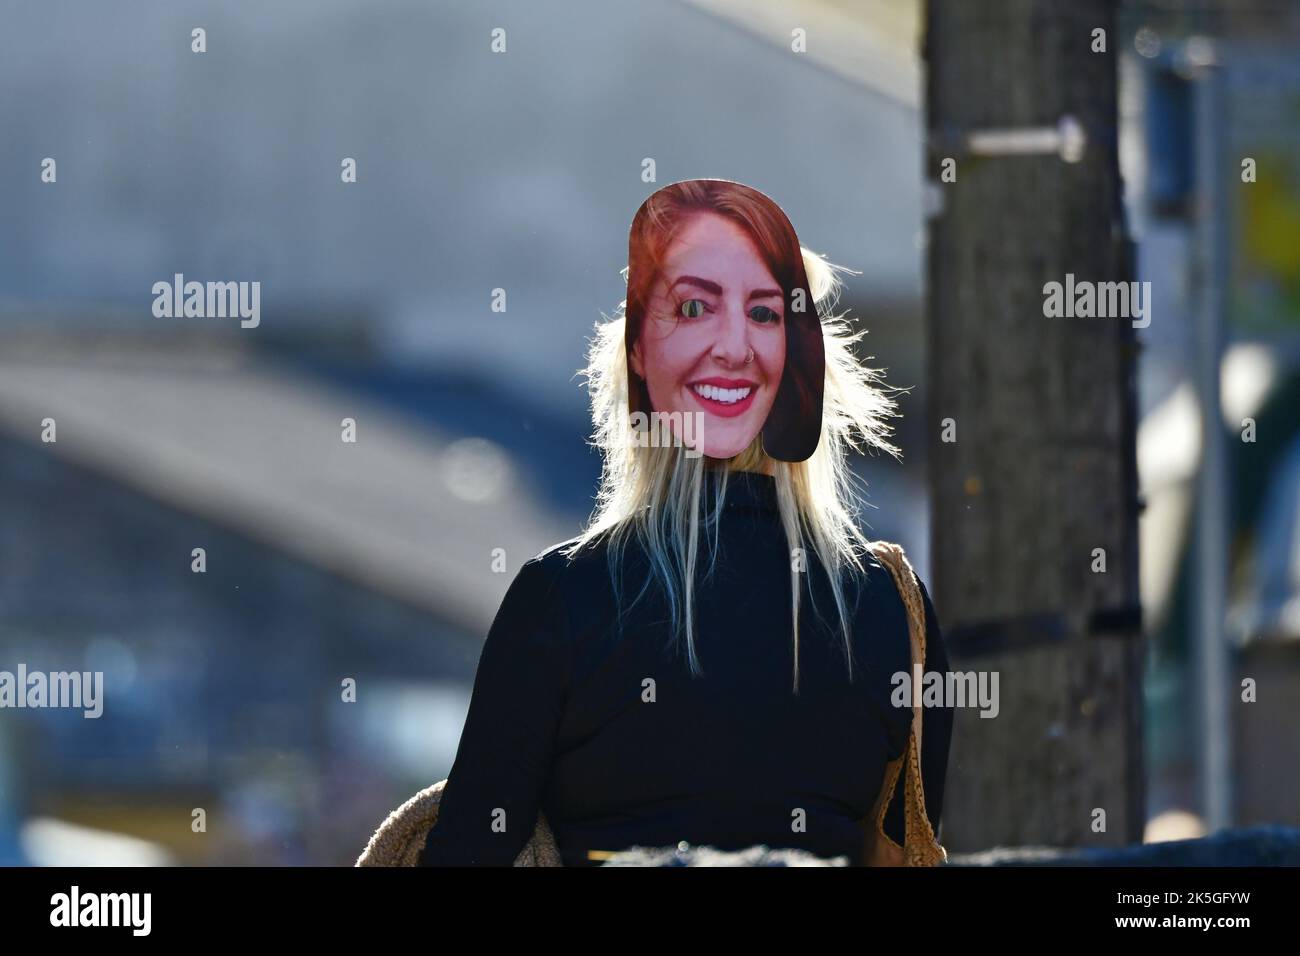 Cheddar, UK. 08th Oct, 2022. A person with friends are seen in Cheddar Gorge near shops wearing a LIZ TRUSS look alike mask on the back of her HEAD. Picture Credit: Robert Timoney/Alamy Live News Stock Photo